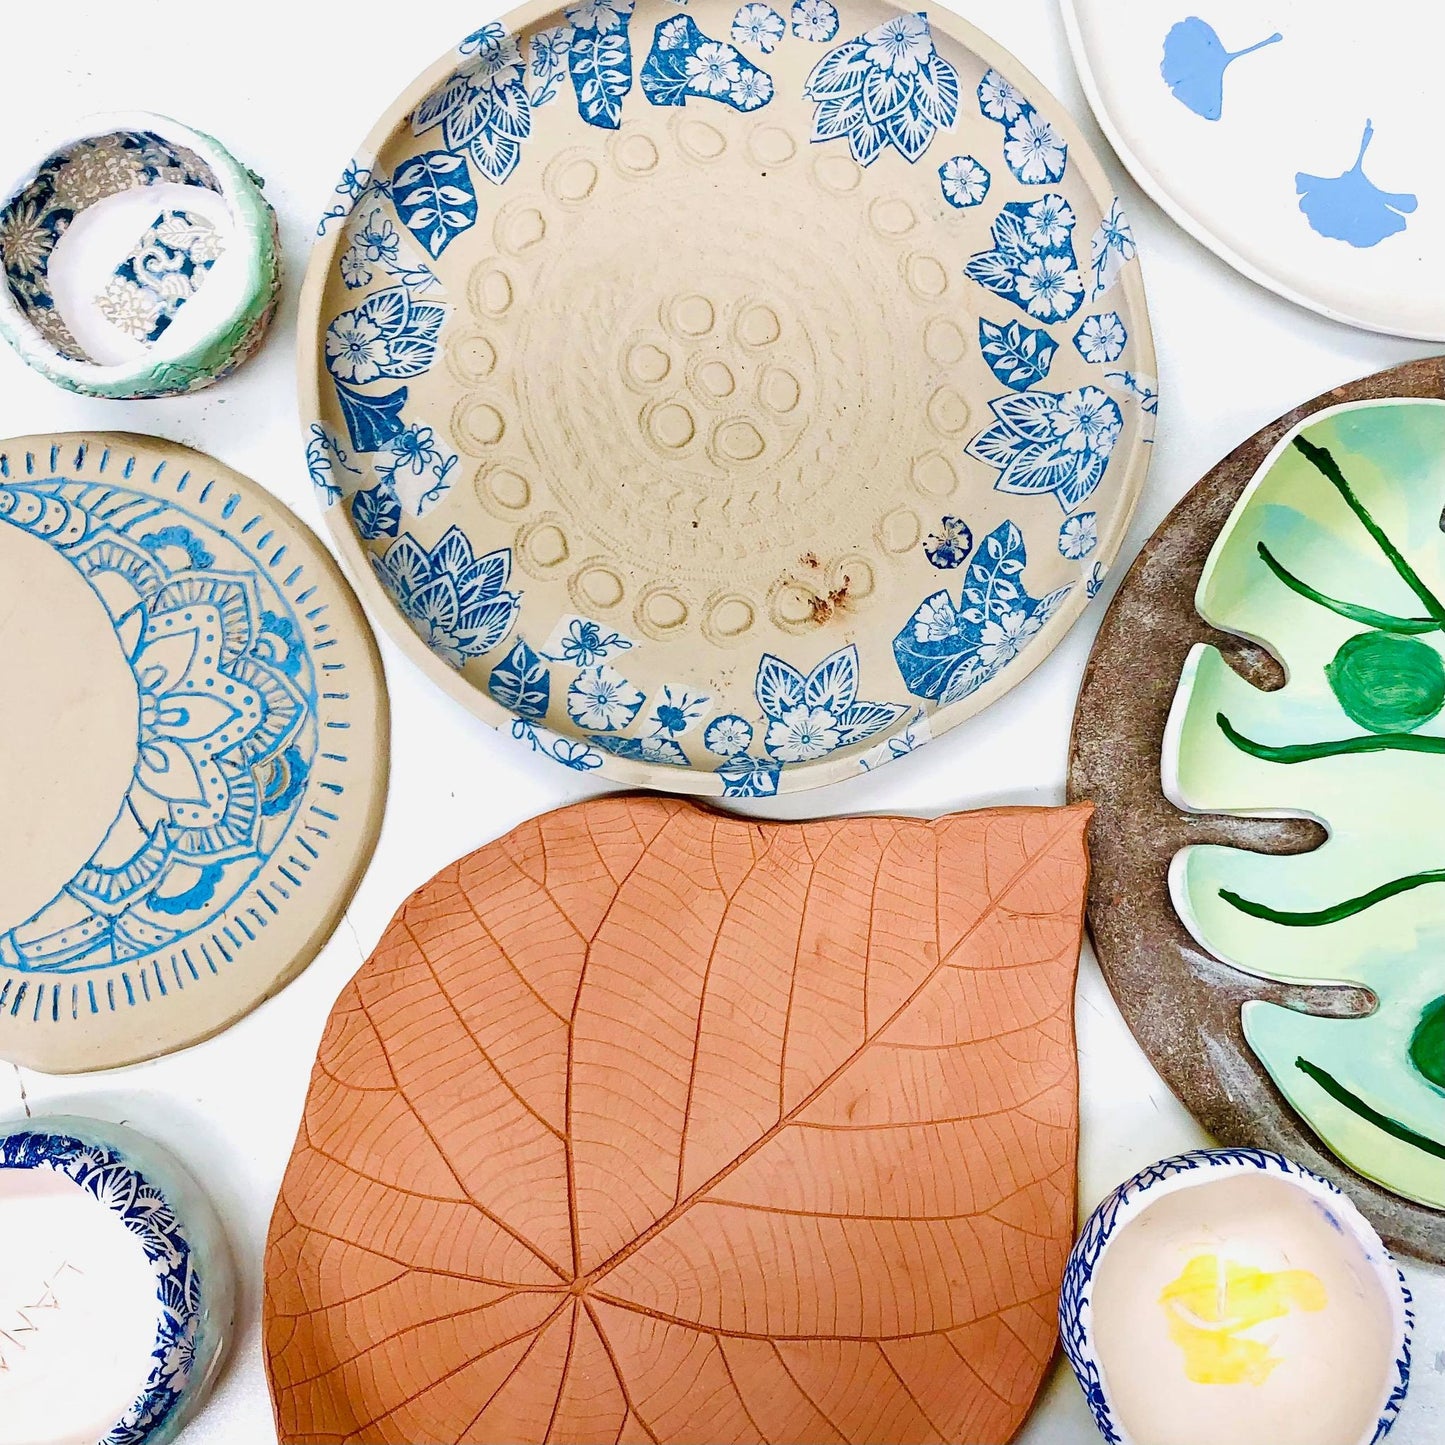 Create you own hand built Pottery Platter and Dip Bowl -  Sunday 3rd March 10am -12